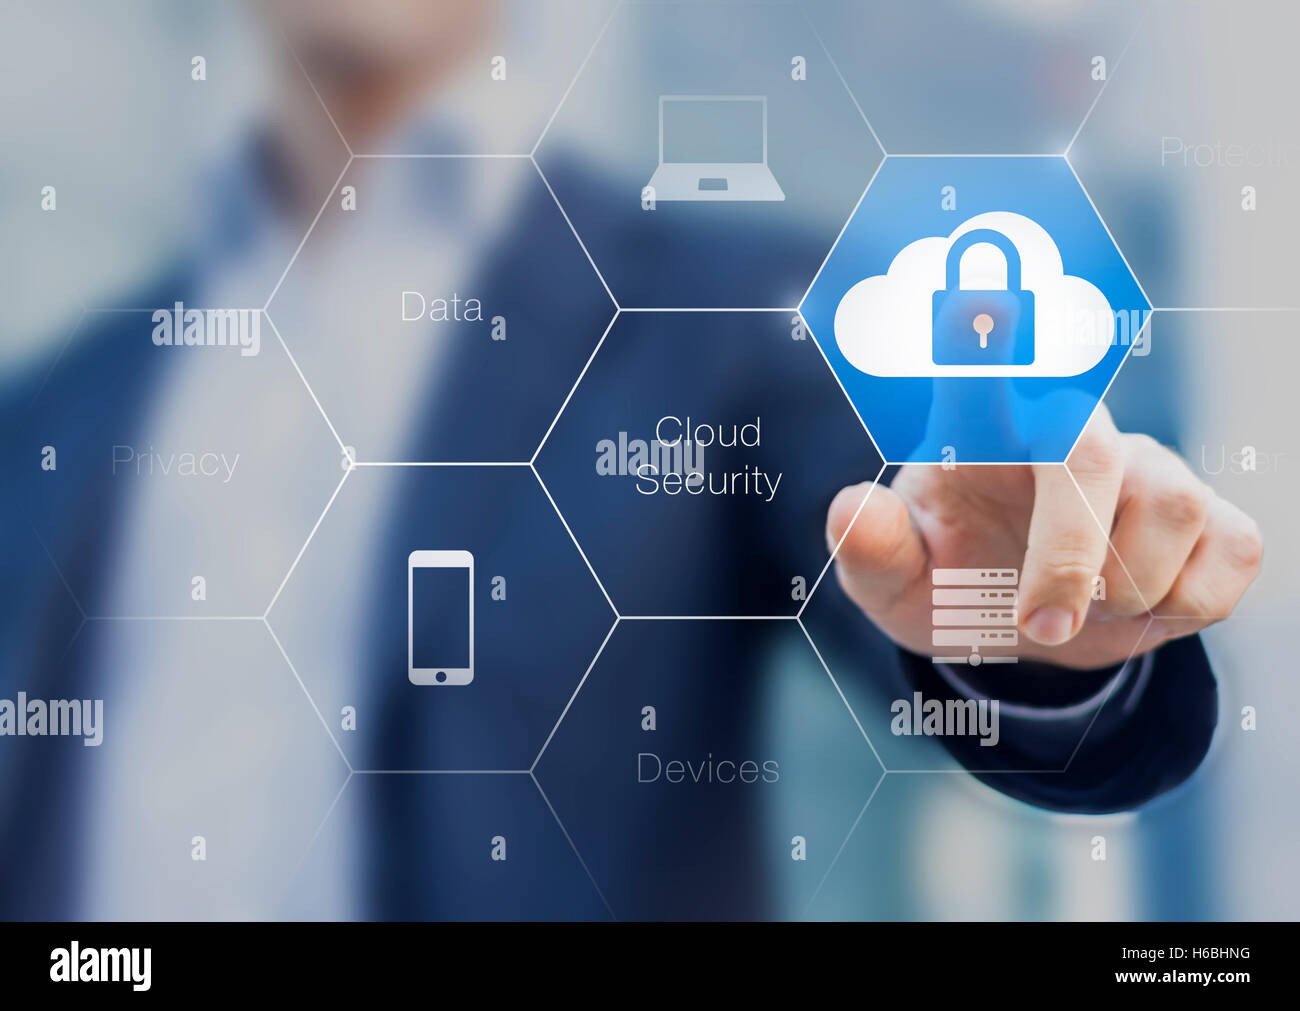 Expert consultant about cloud security protecting networks and devices against cyber attacks Stock Photo